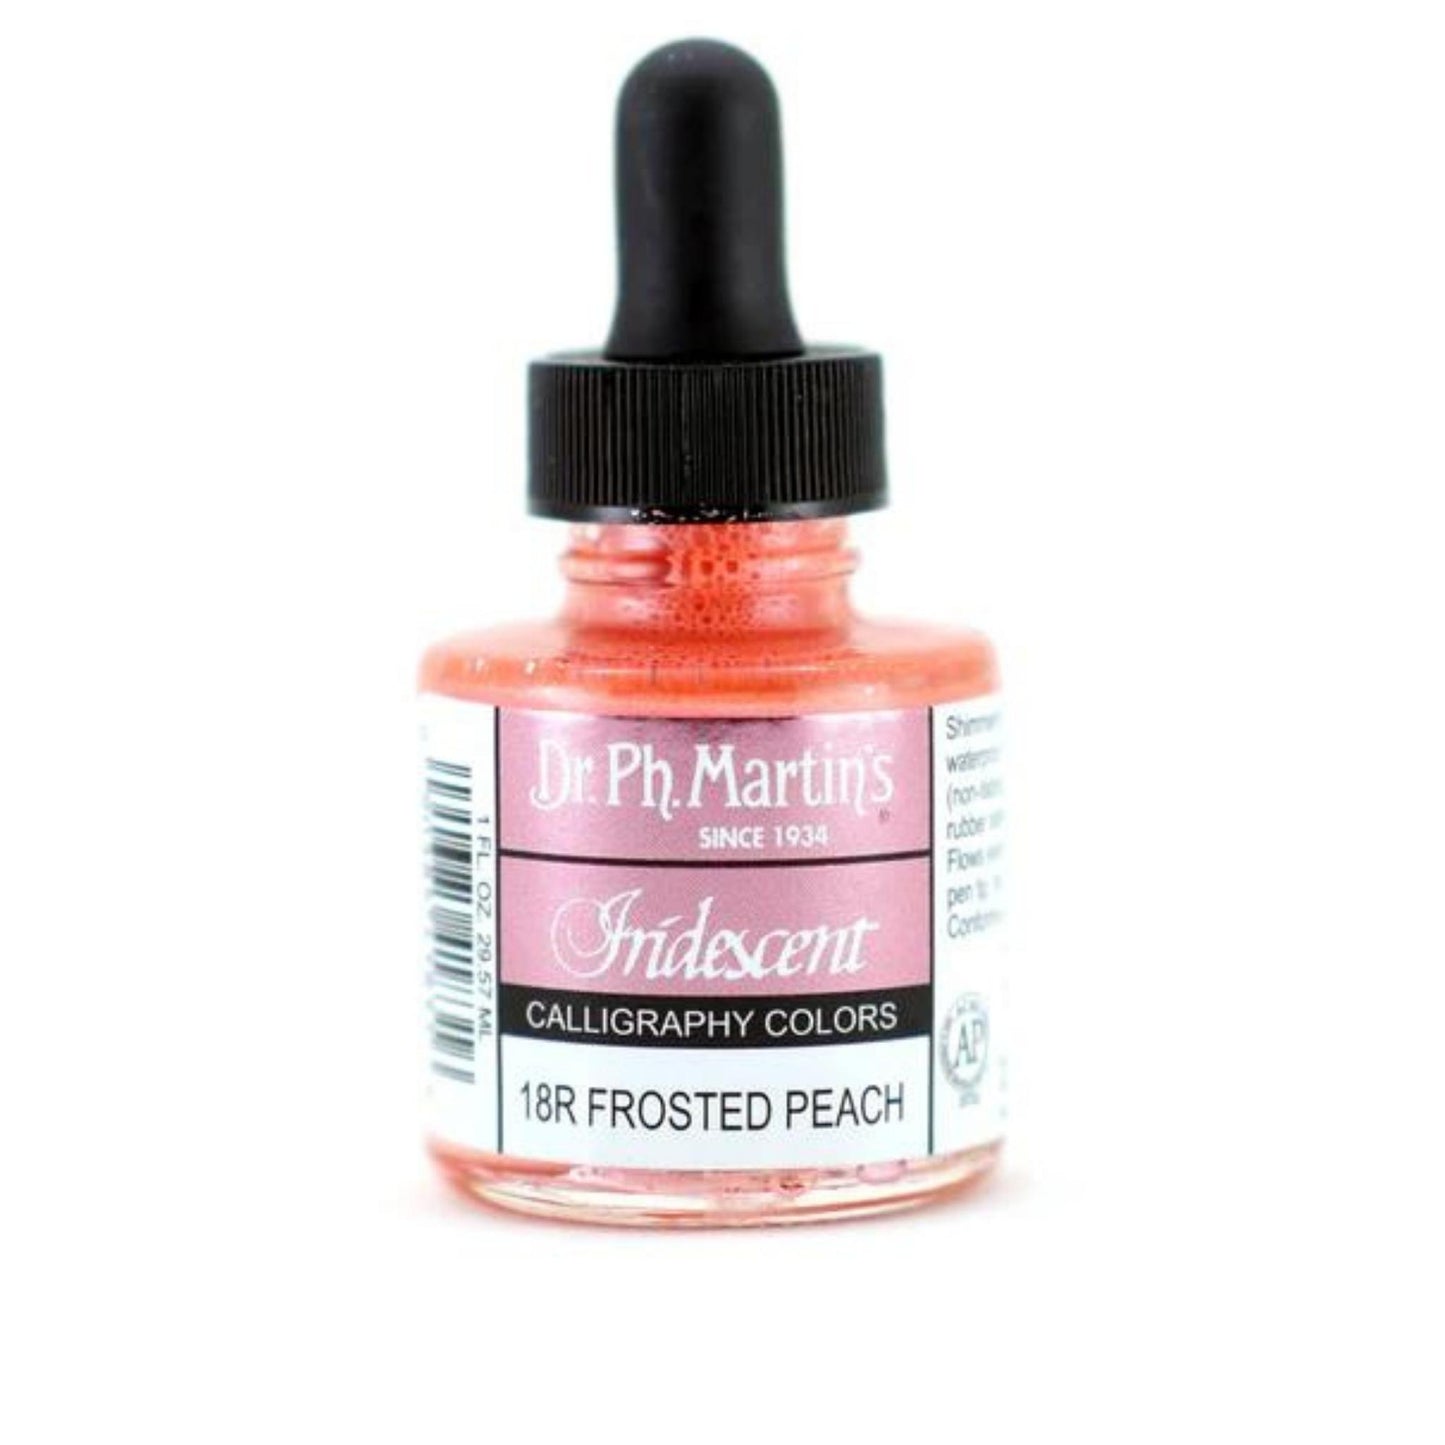 Dr.Ph.Martins - Iridescent Calligraphy: 18R Frosted Peach